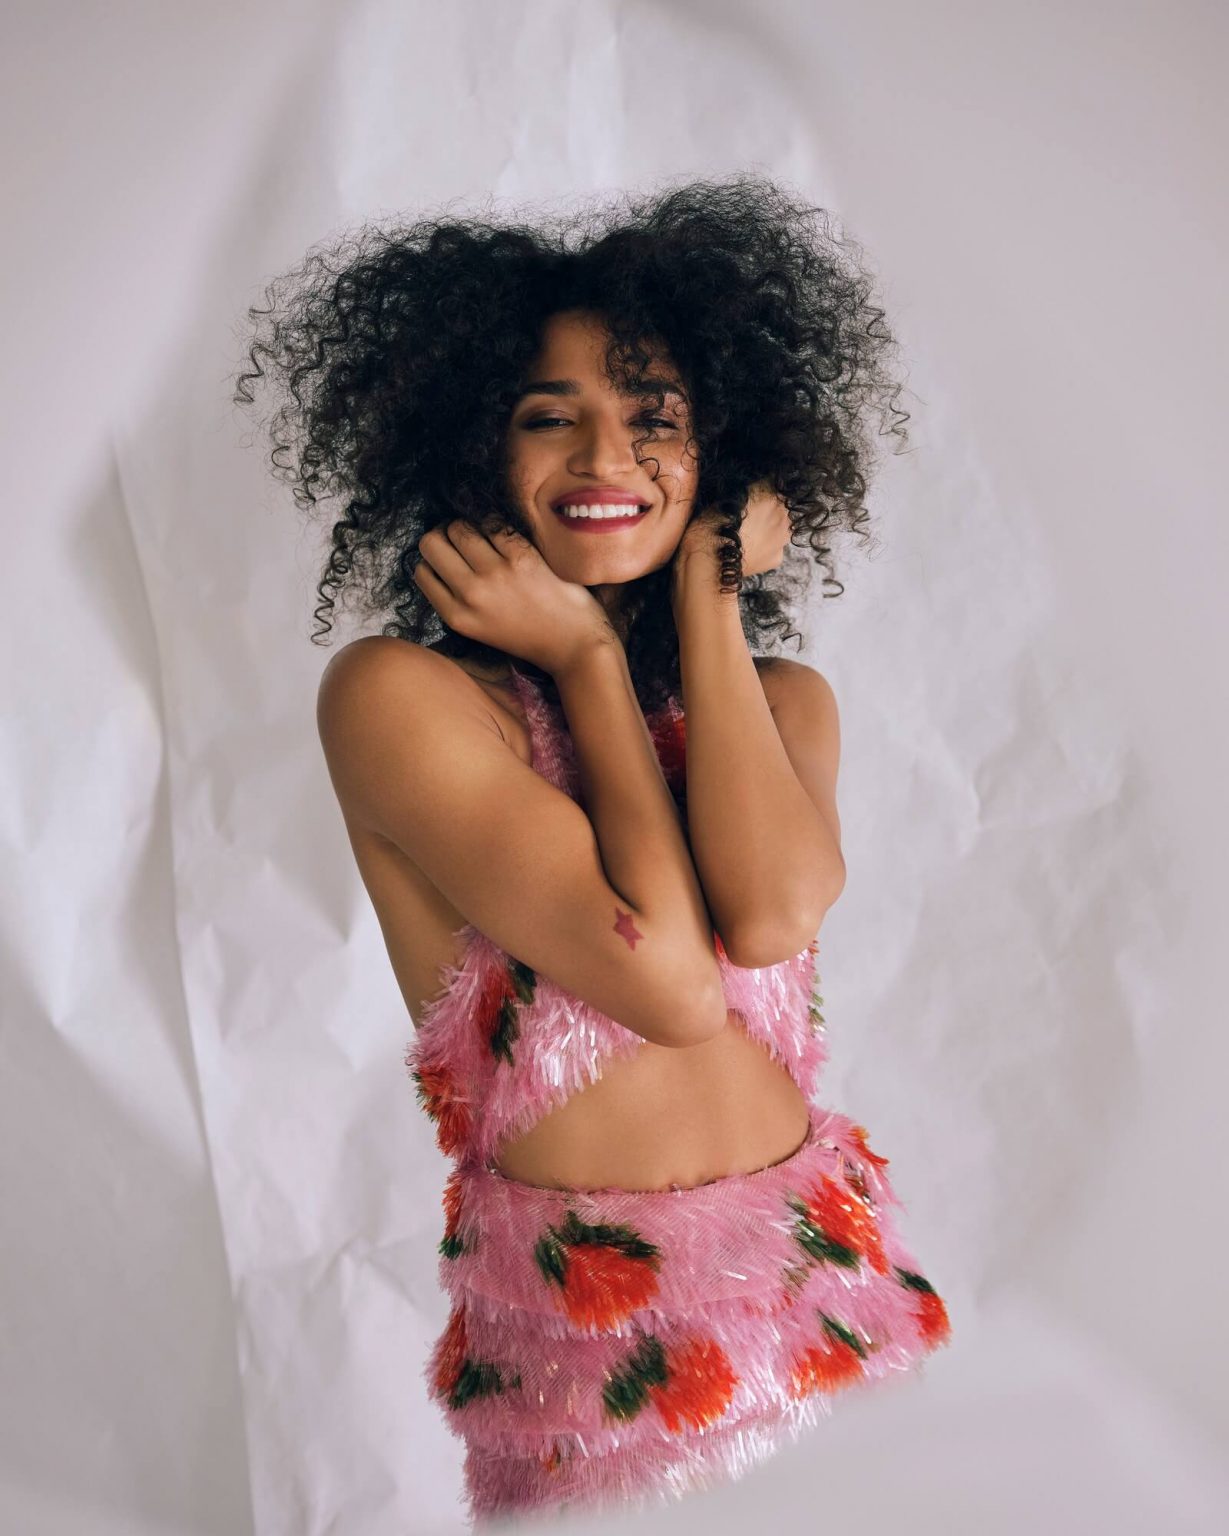 The Hottest Photos Of Indya Moore.